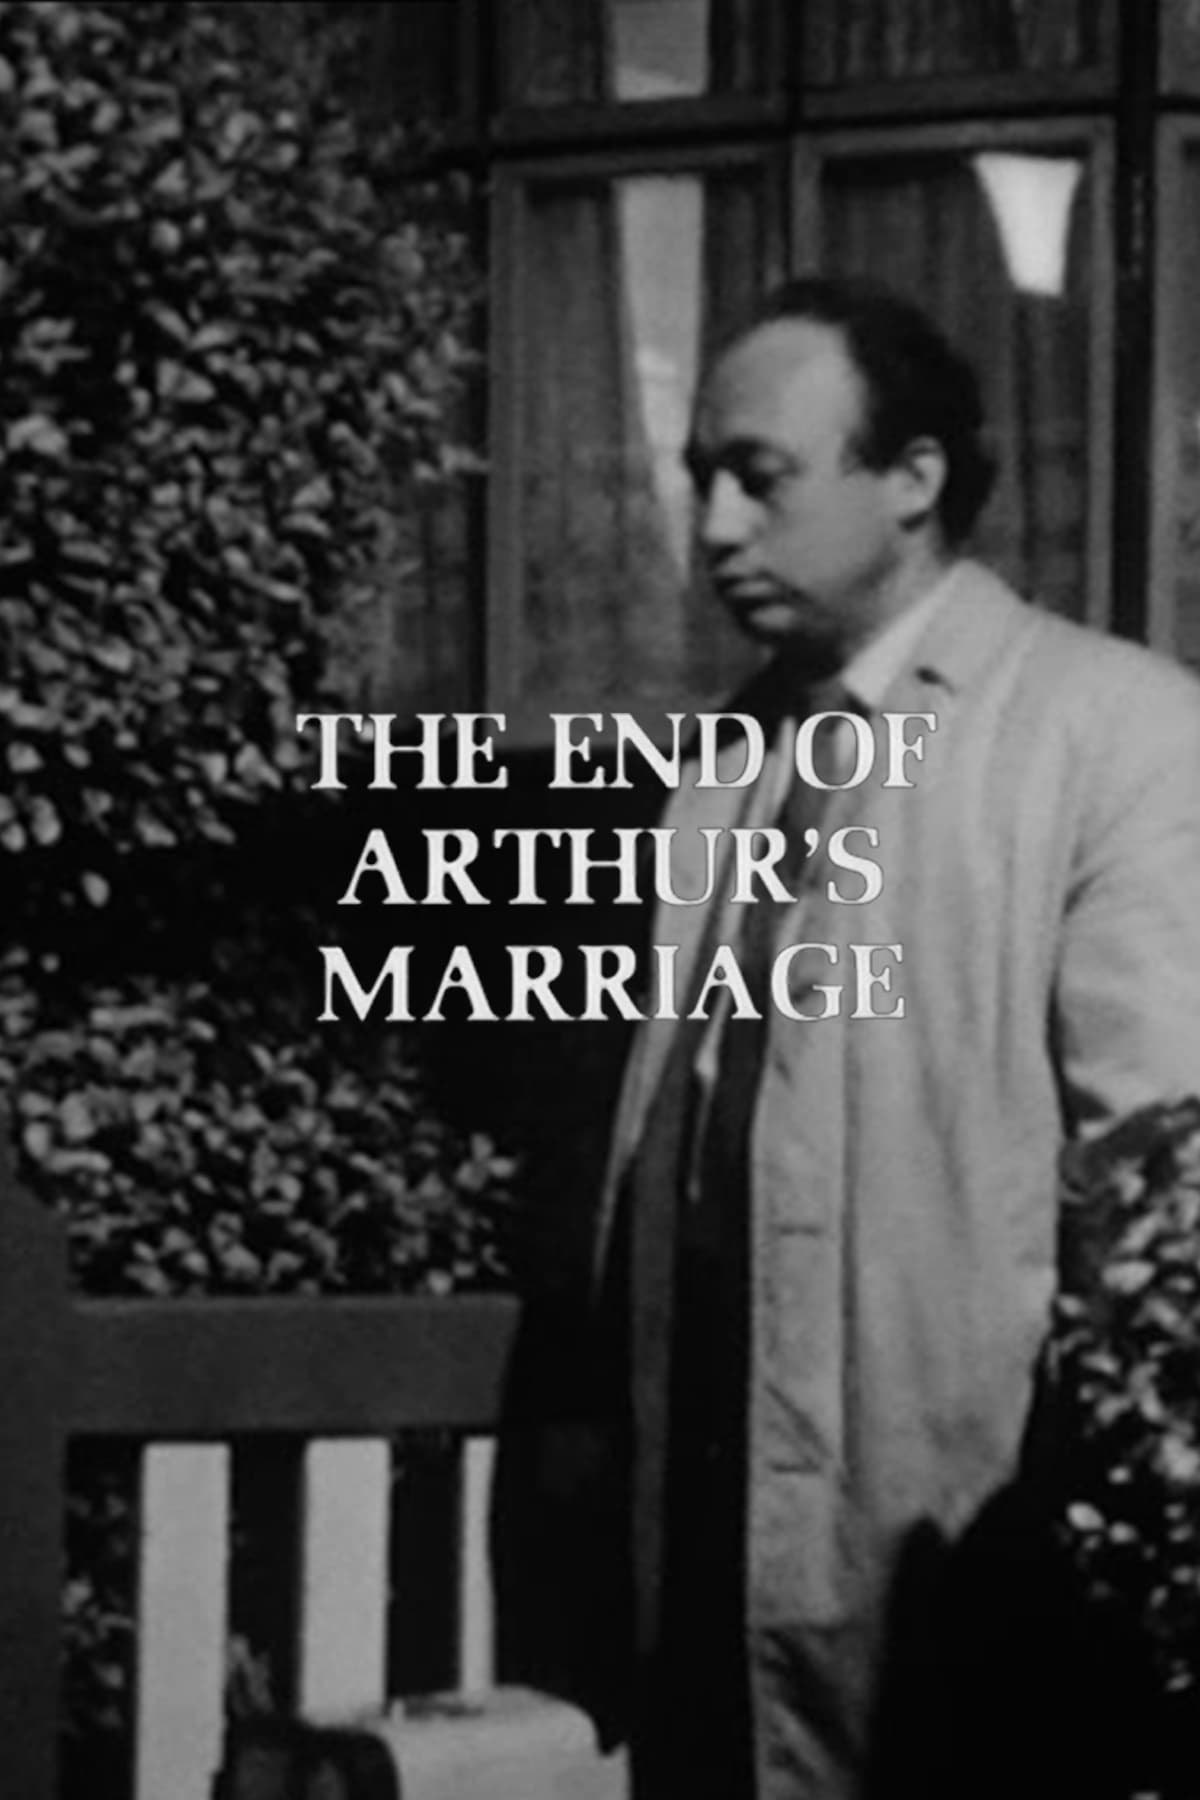 The End of Arthur's Marriage (1965)